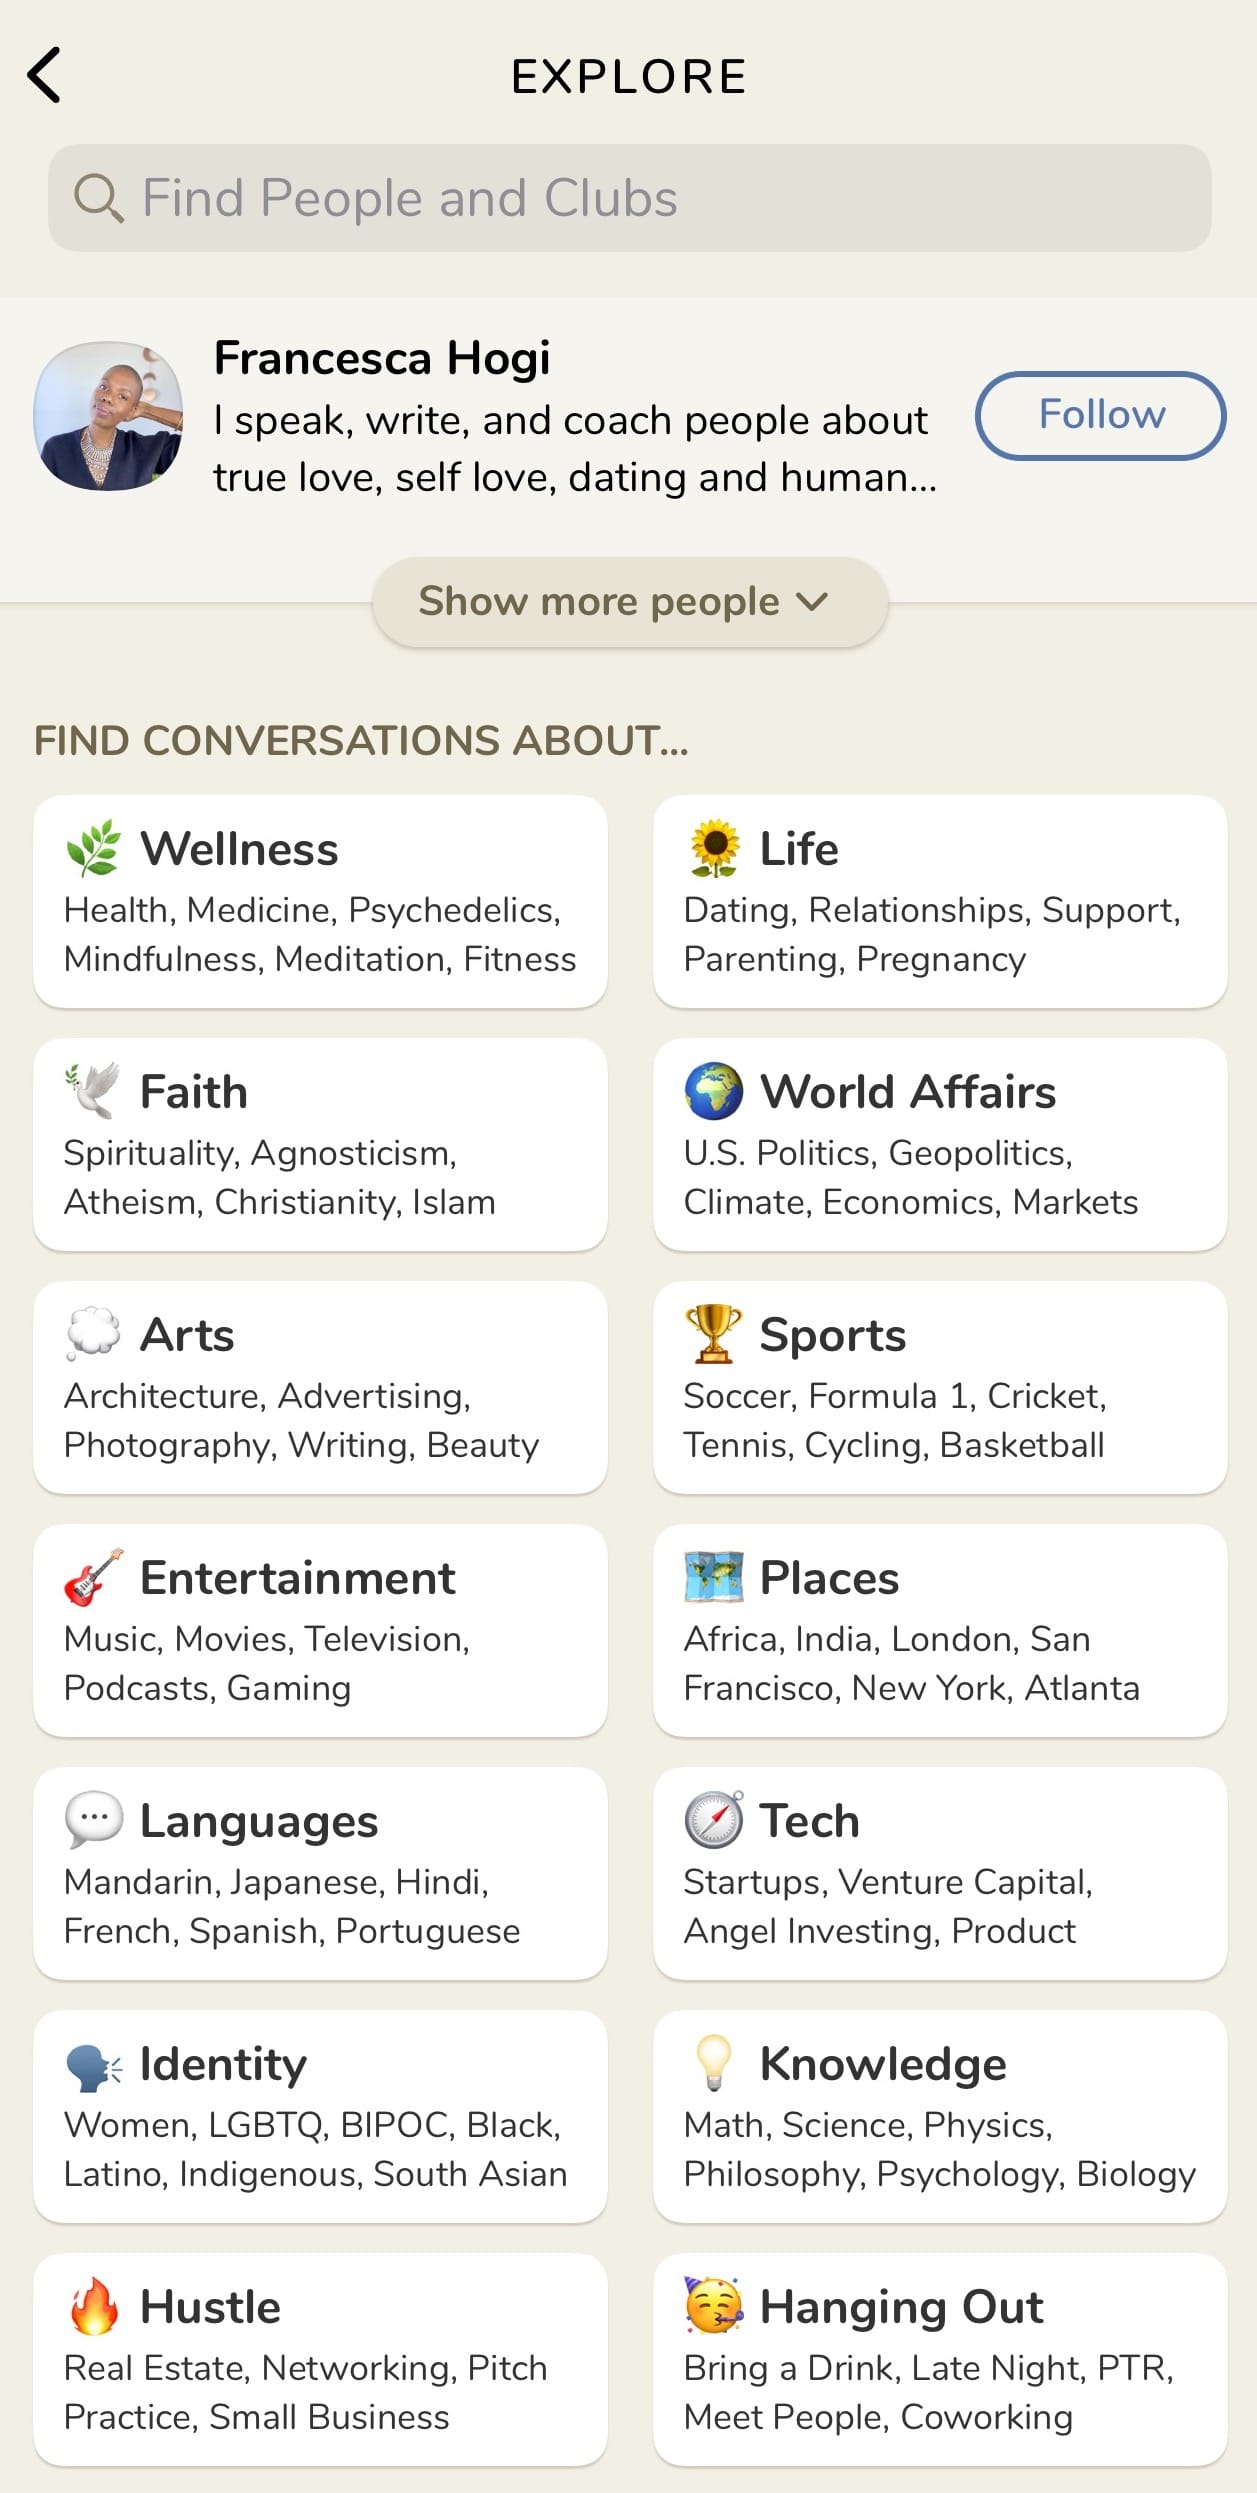 Explore page in the Clubhouse App: wellness, life, faith, world affairs, art, entertainment